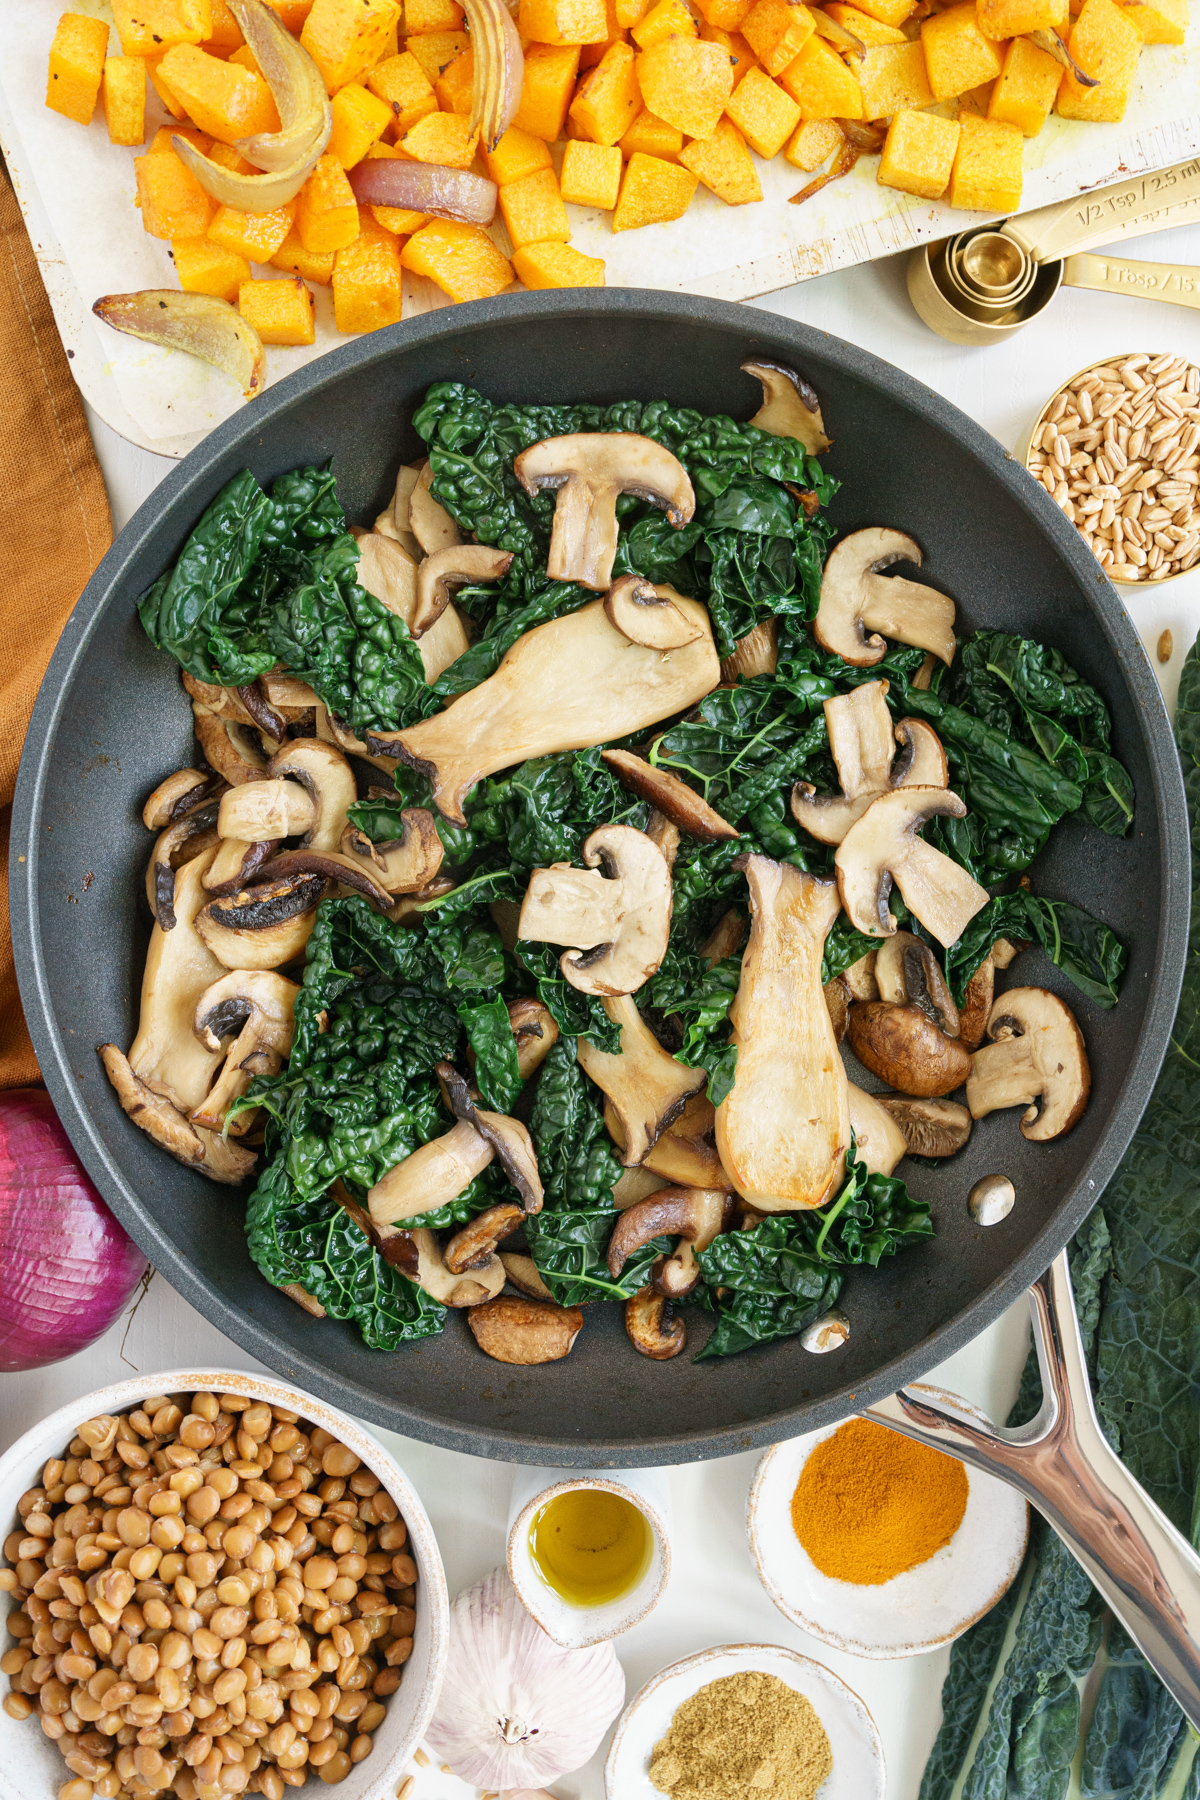 Kale added to the skillet with the mushrooms.